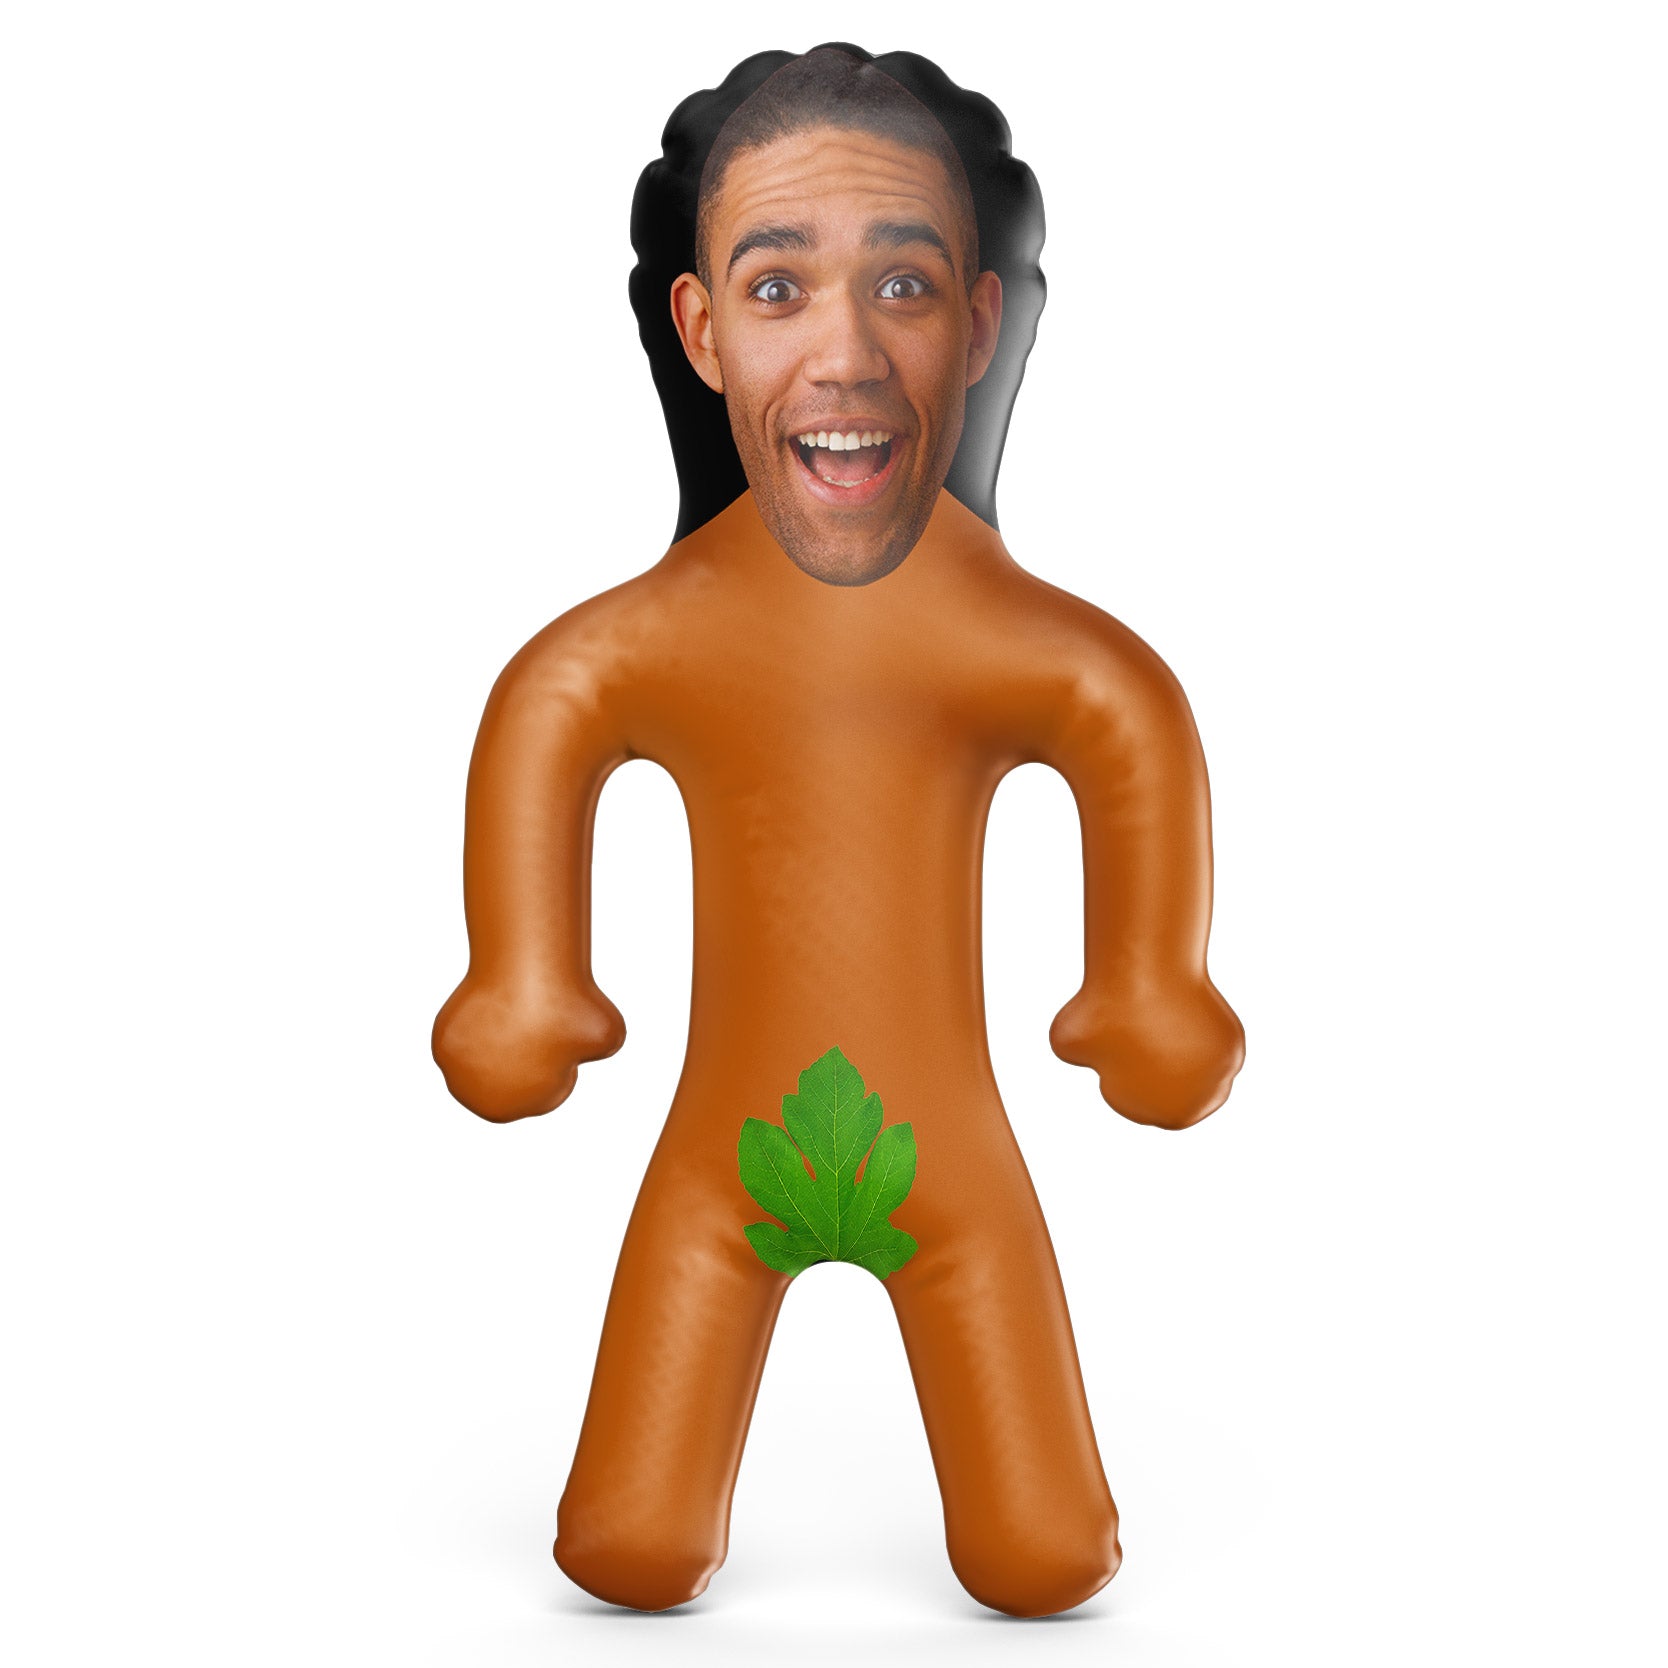 The Male Naturist Inflatable Doll - Naturist Blow Up Doll